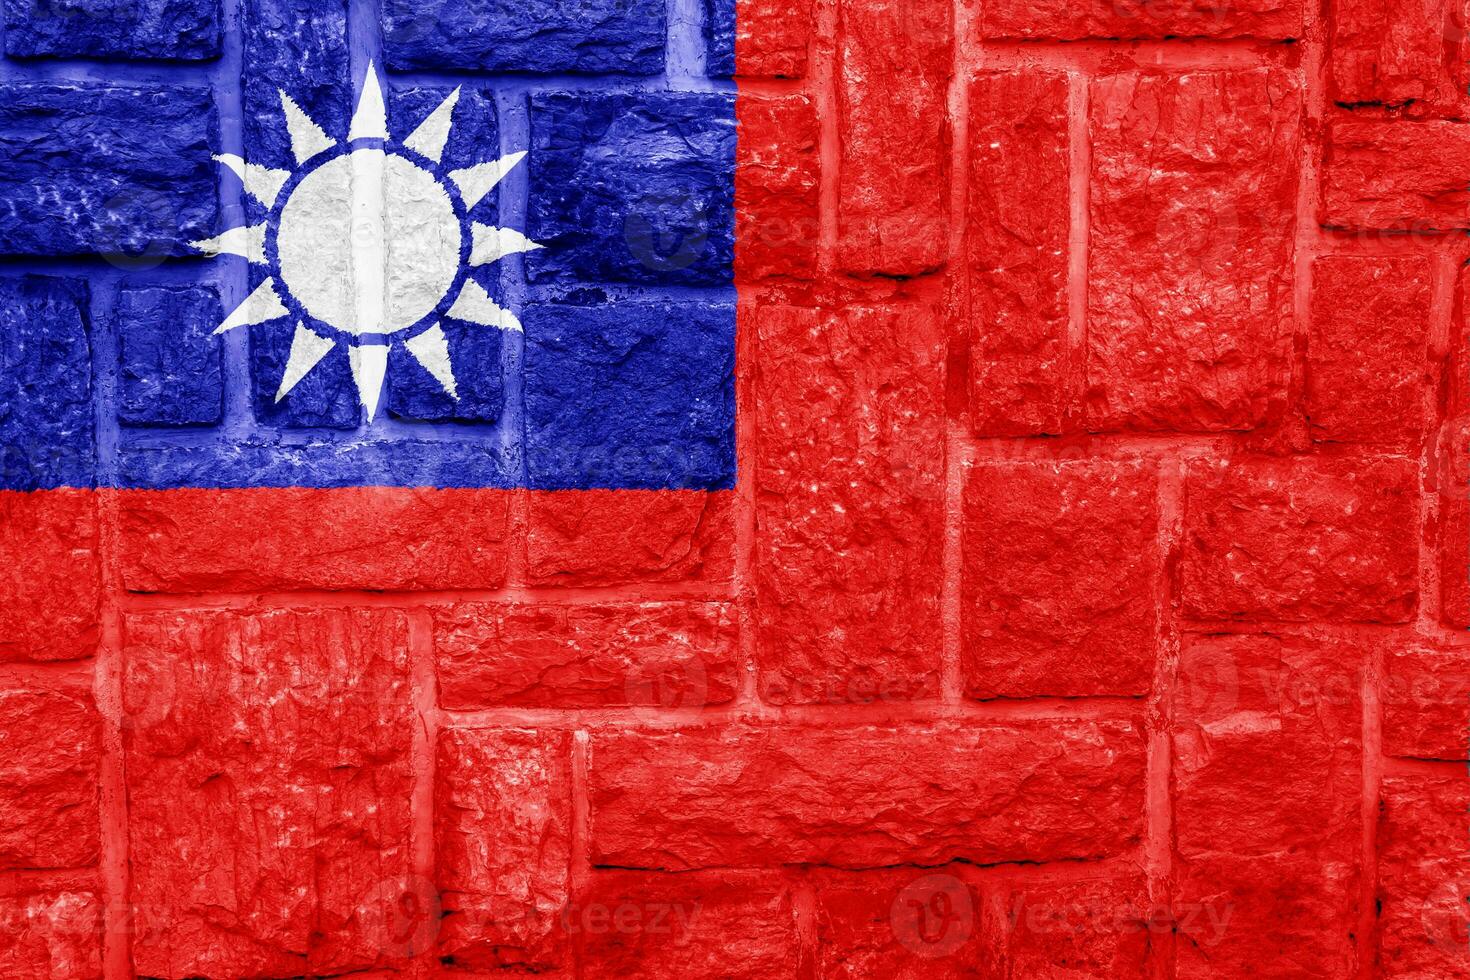 Flag of Republic of China Taiwan on a textured background. Concept collage. photo